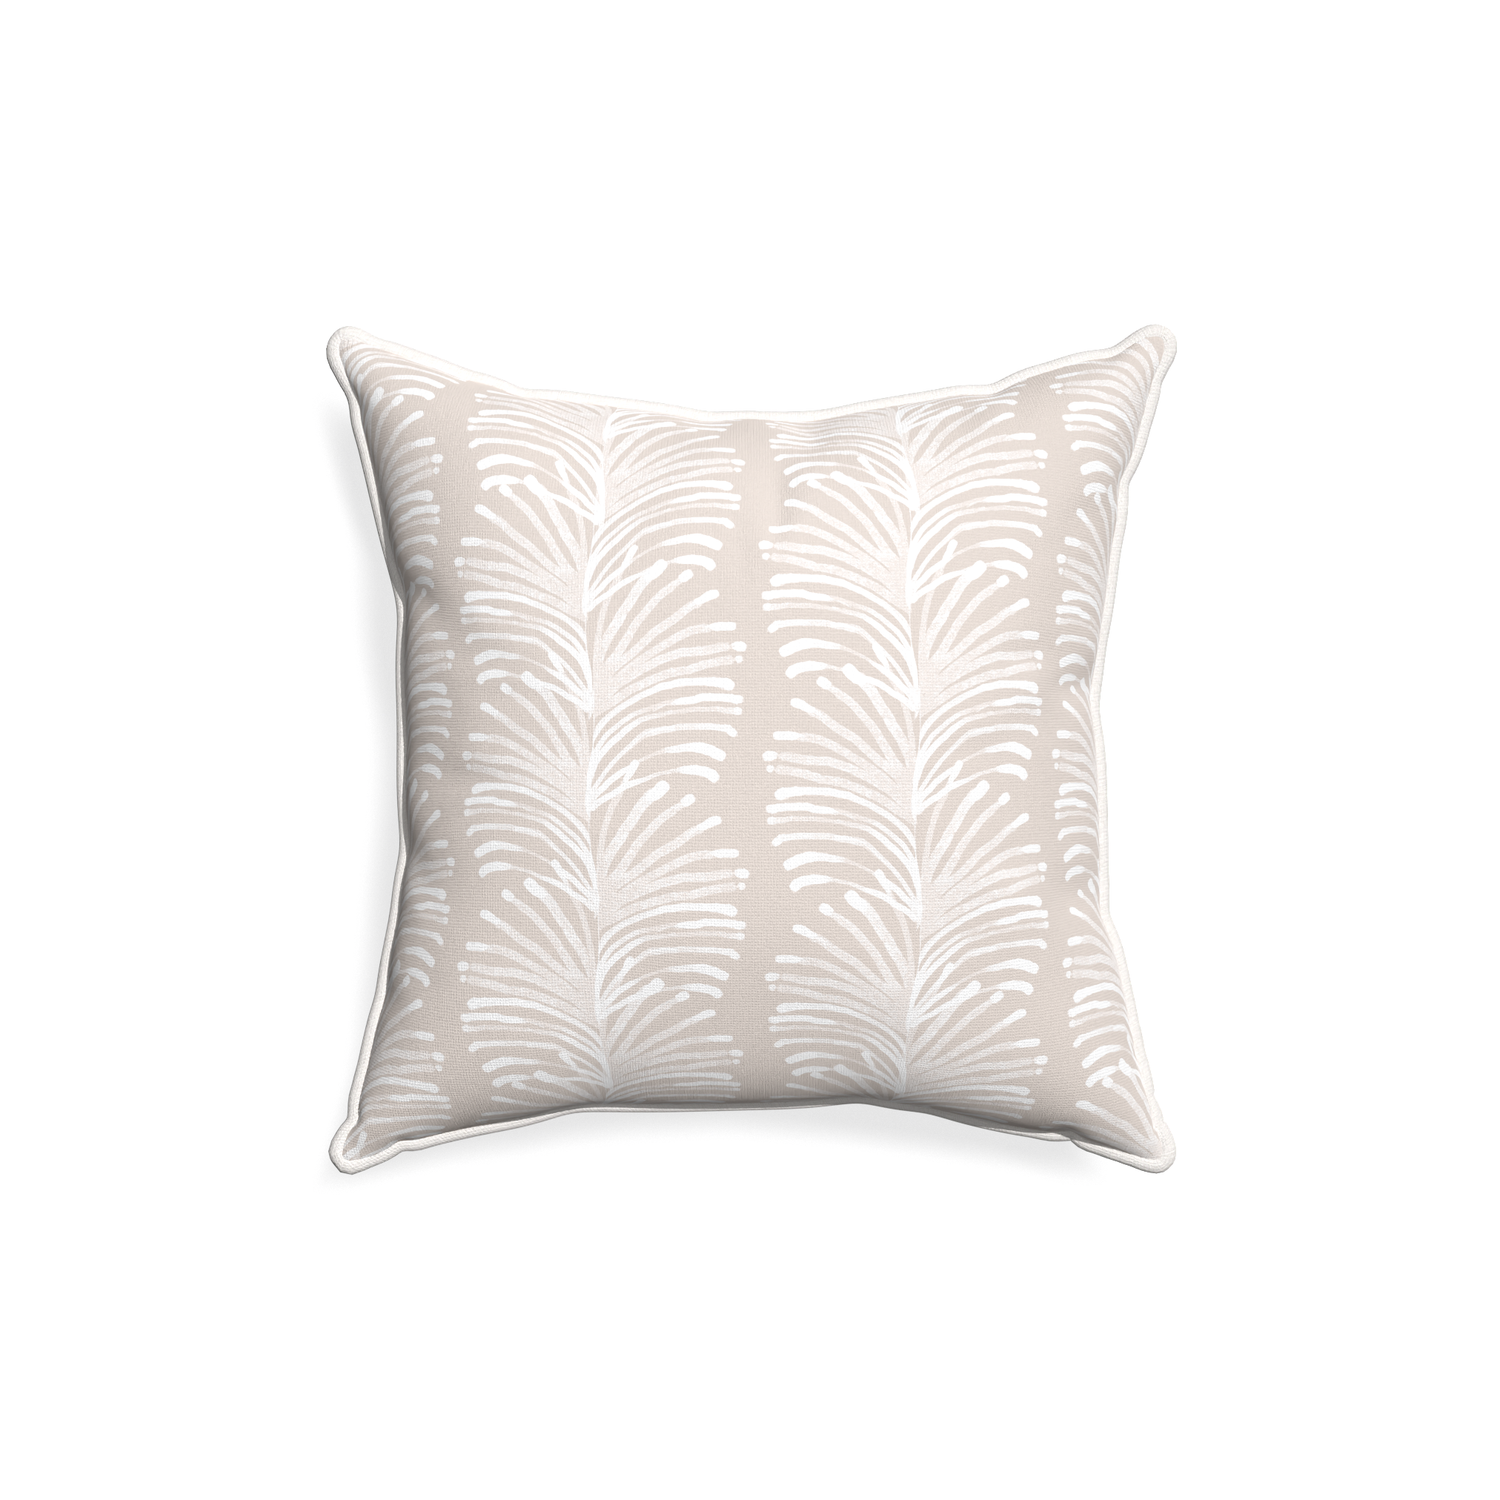 18-square emma sand custom pillow with snow piping on white background